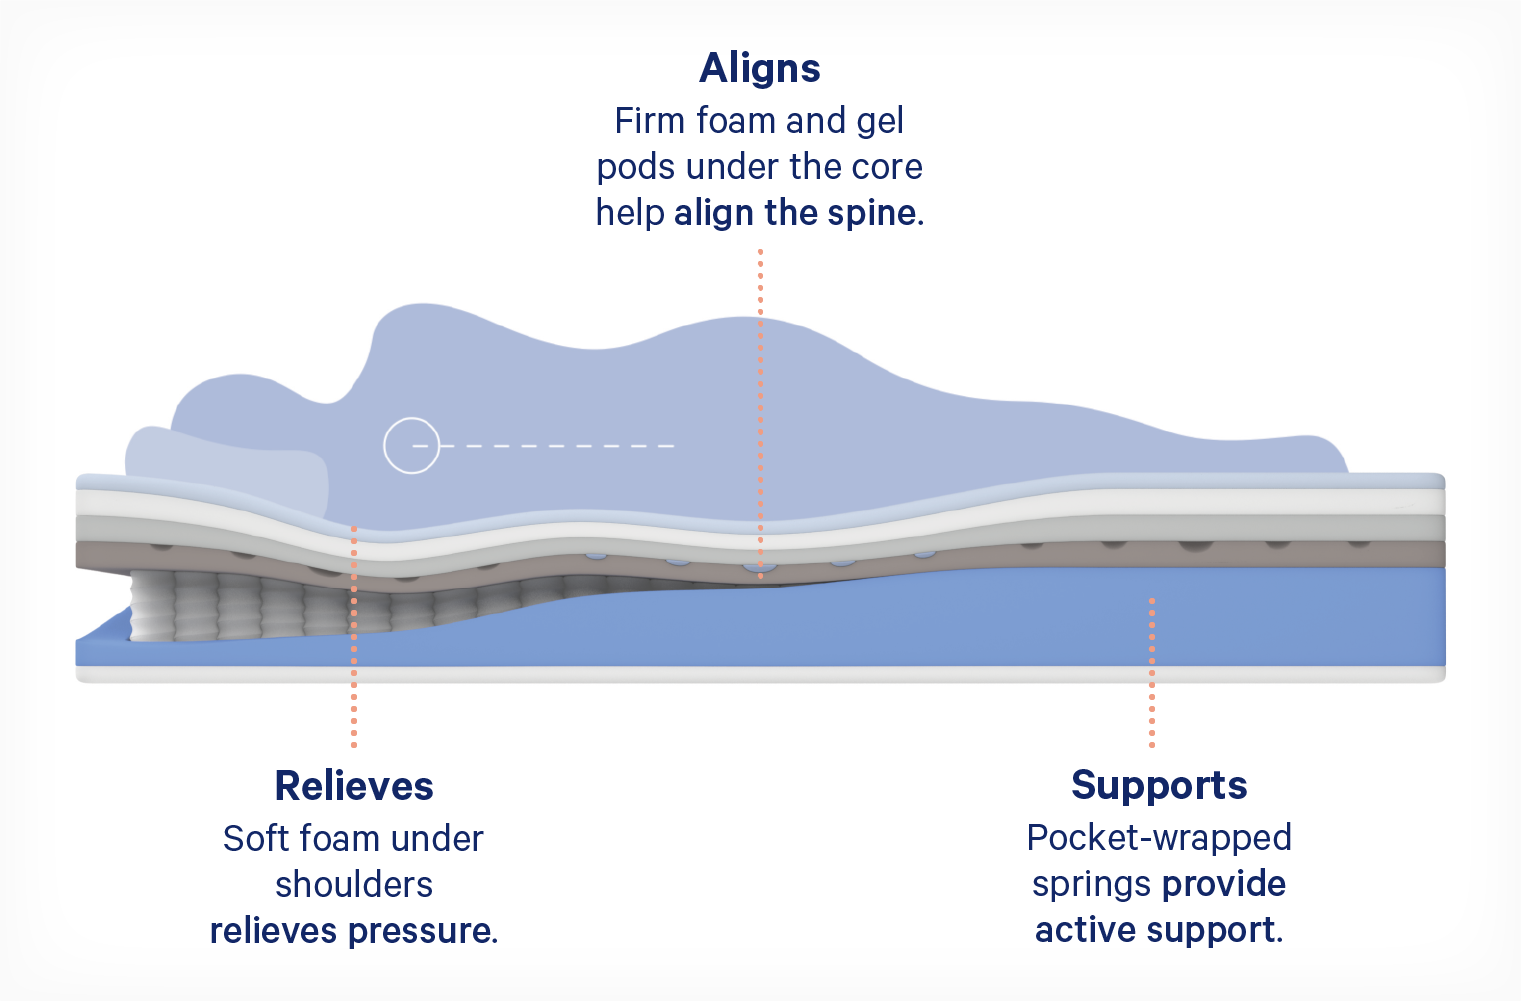 Diagram showing how a hybrid mattress aligns the spine and alleviates pressure